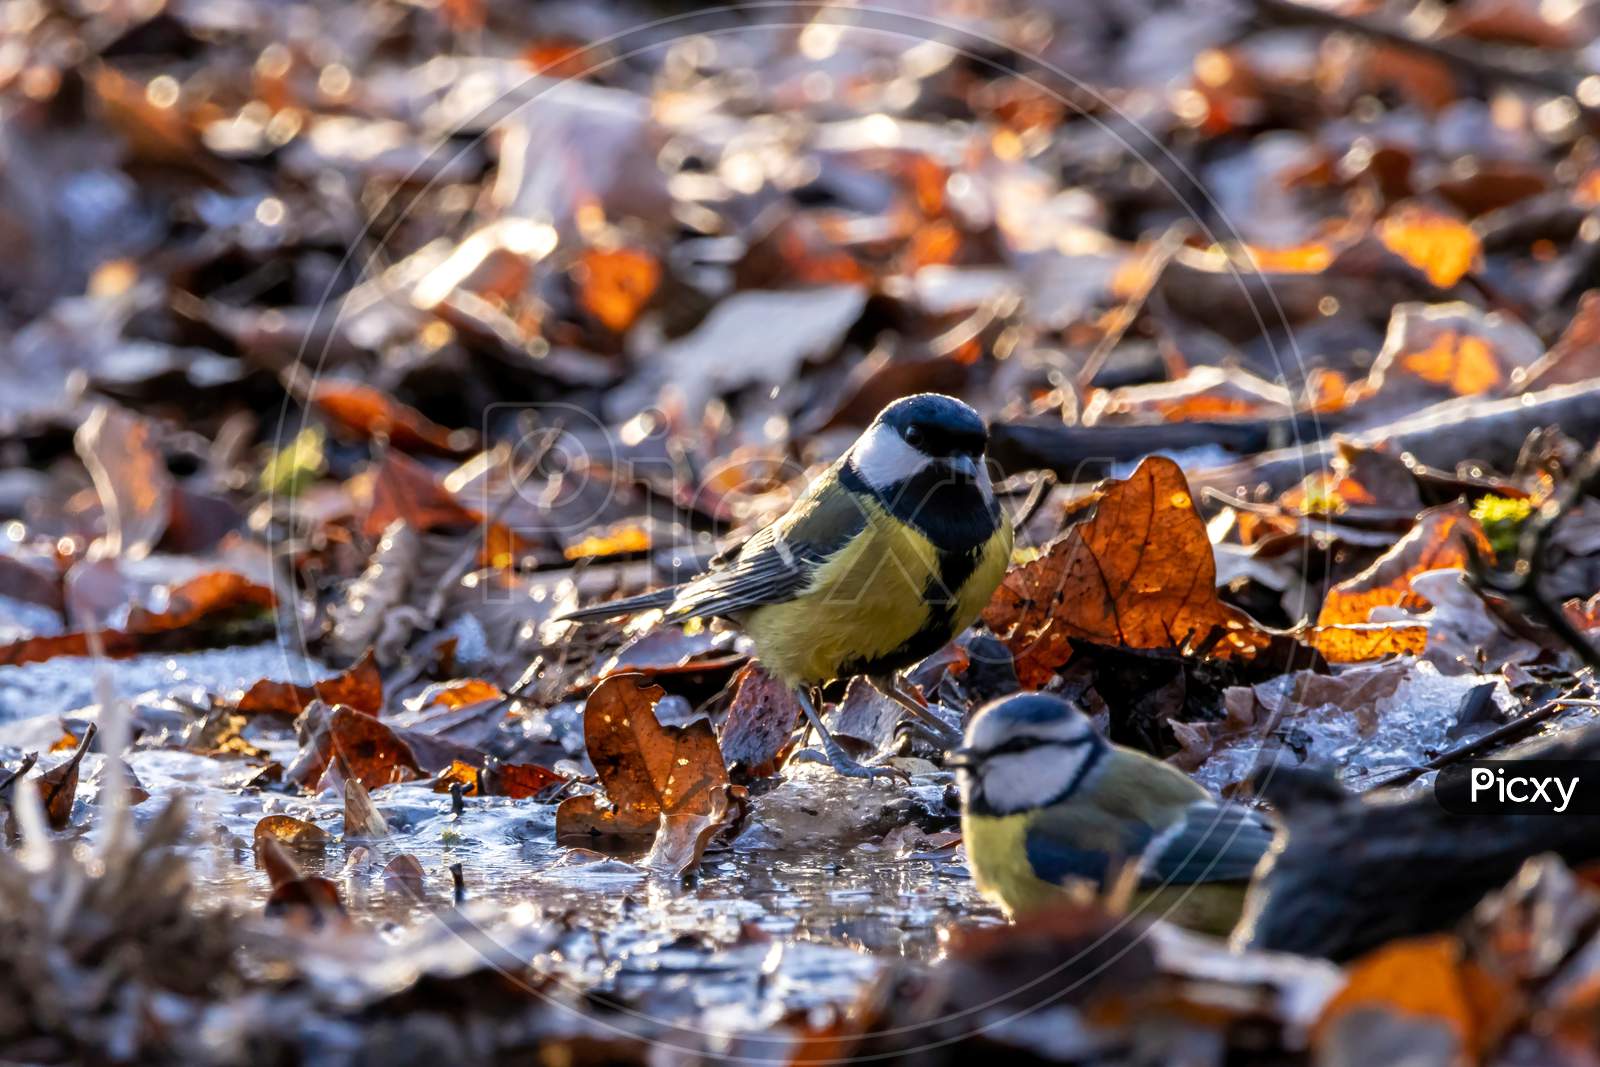 A coal tit taking a bath at a little frozen pond, using the only free space with water, surrounded by leaf at a cold day in winter in the natural reserve called Mönchbruch in Hesse, Germany.